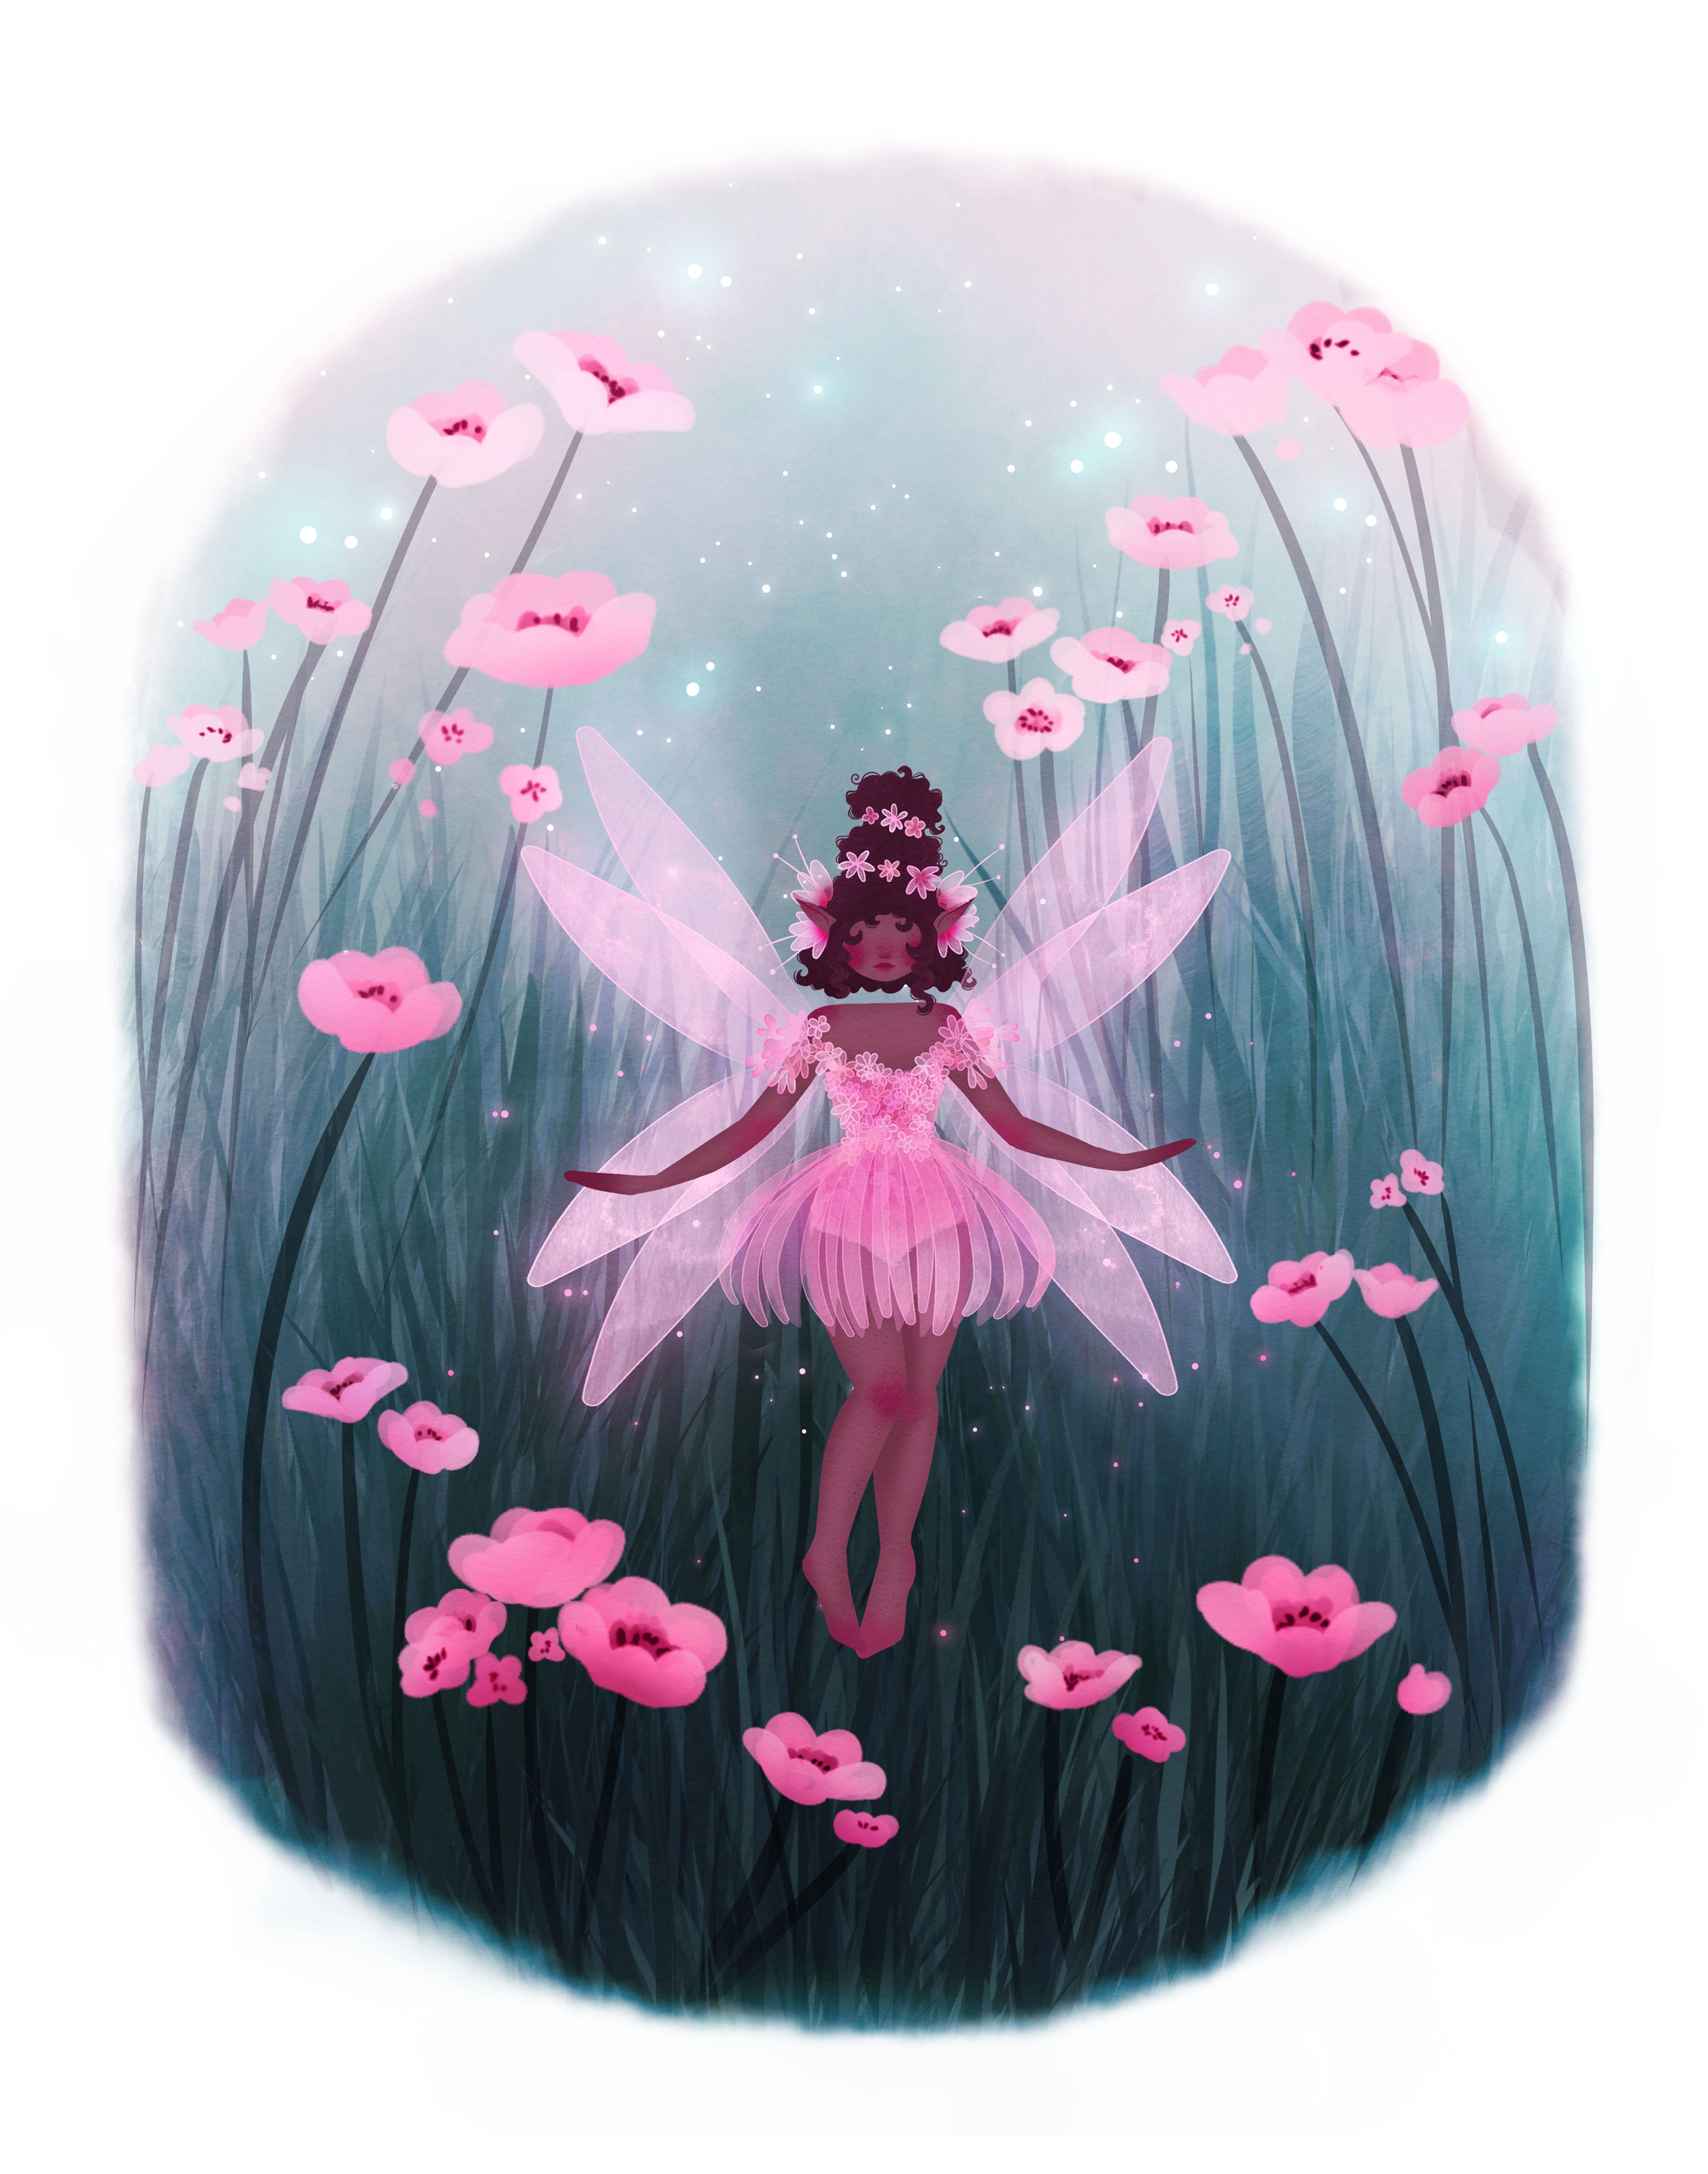 CLEARANCE "Little Pink Fairy" LIMITED EDITION Wall Art Print